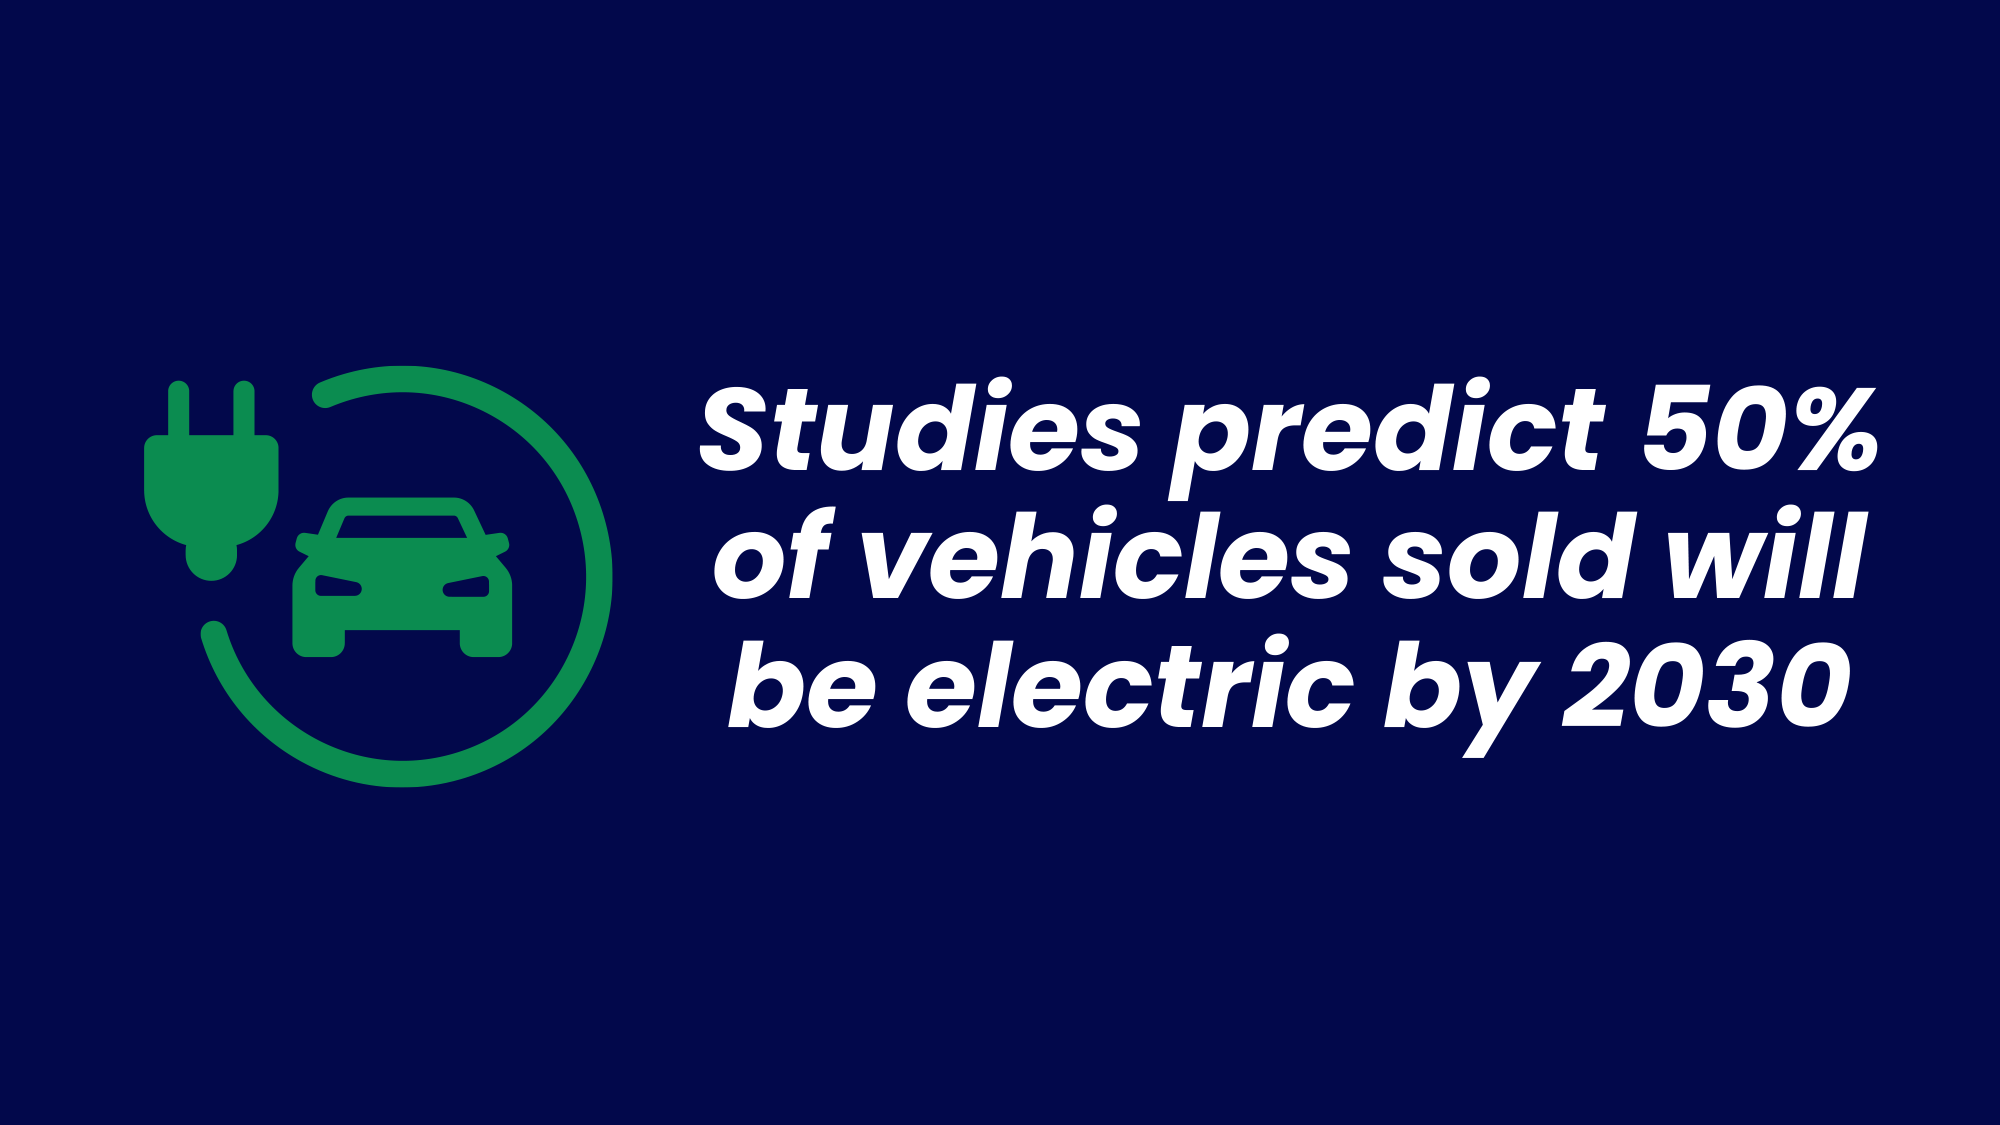 Studies predict 50% of vehicles sold will be electric by 2030